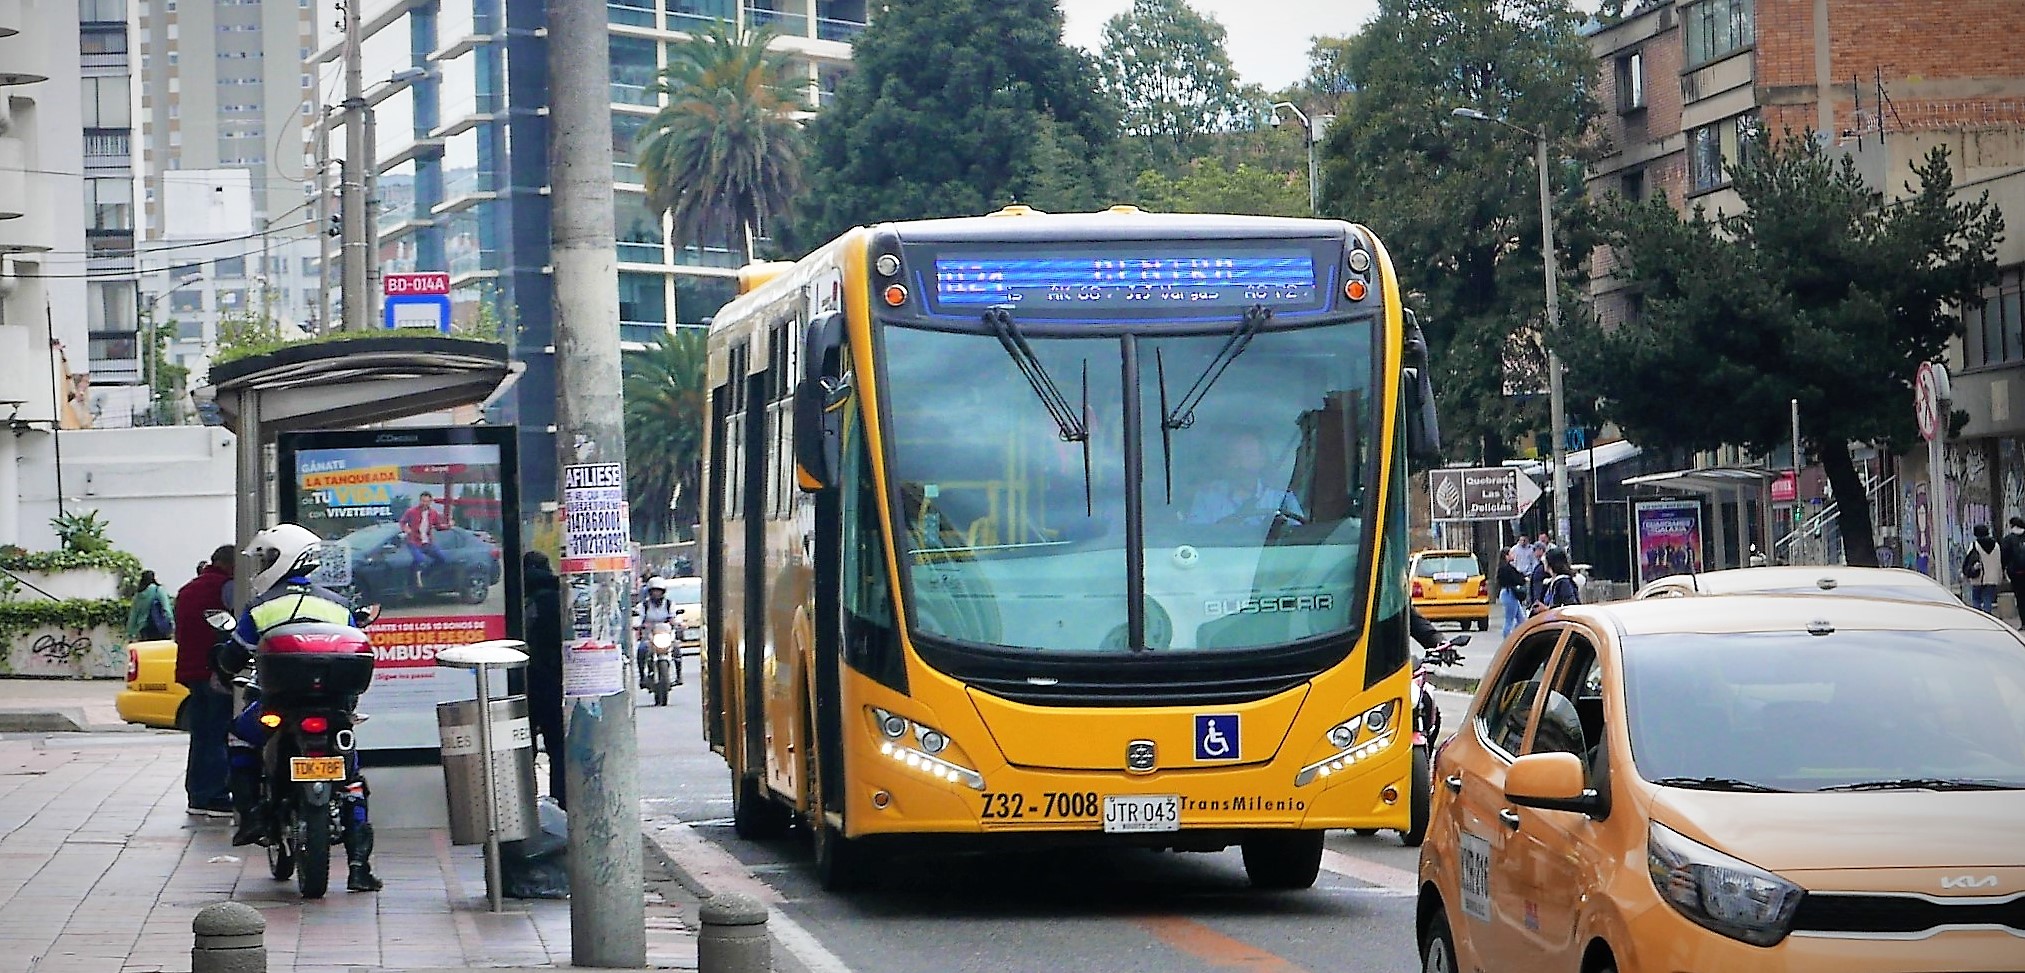 Transport in Bogotá is being slowly transformed by a huge modern bus fleet. Tt's slow, but frequent, and goes everywhere.